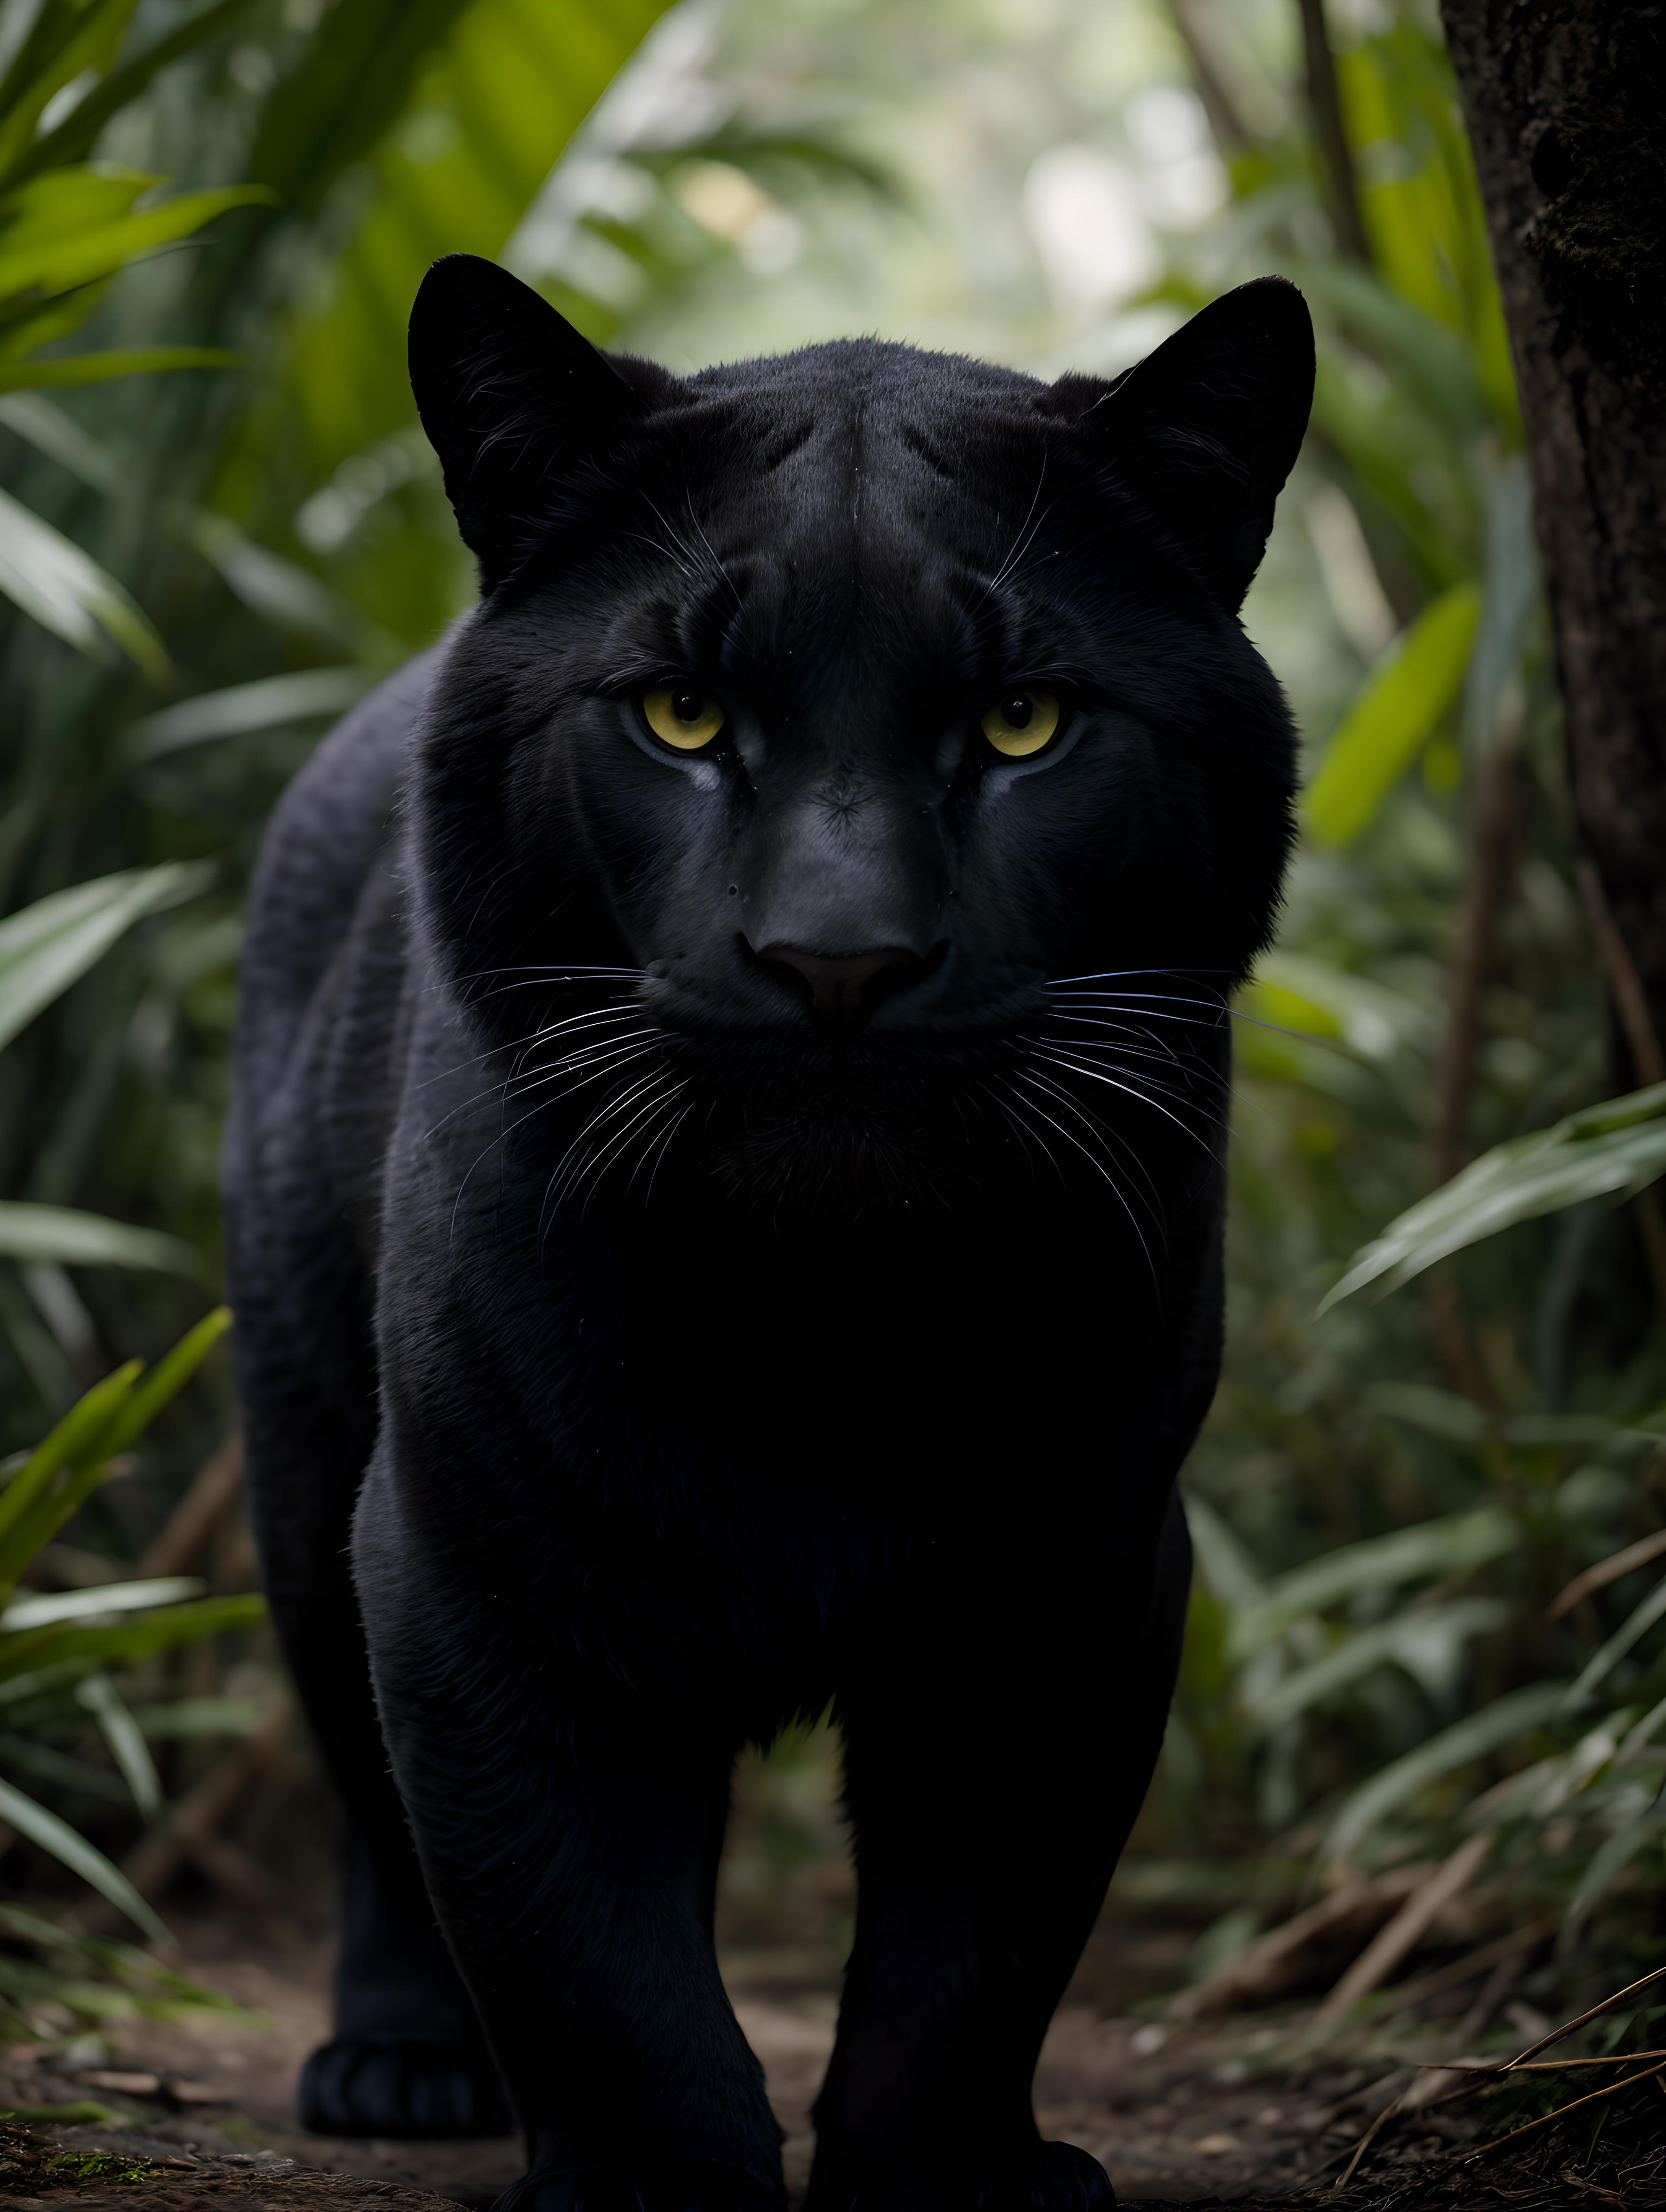 A close-up of a black panther looking at the camera in a lush green forest.